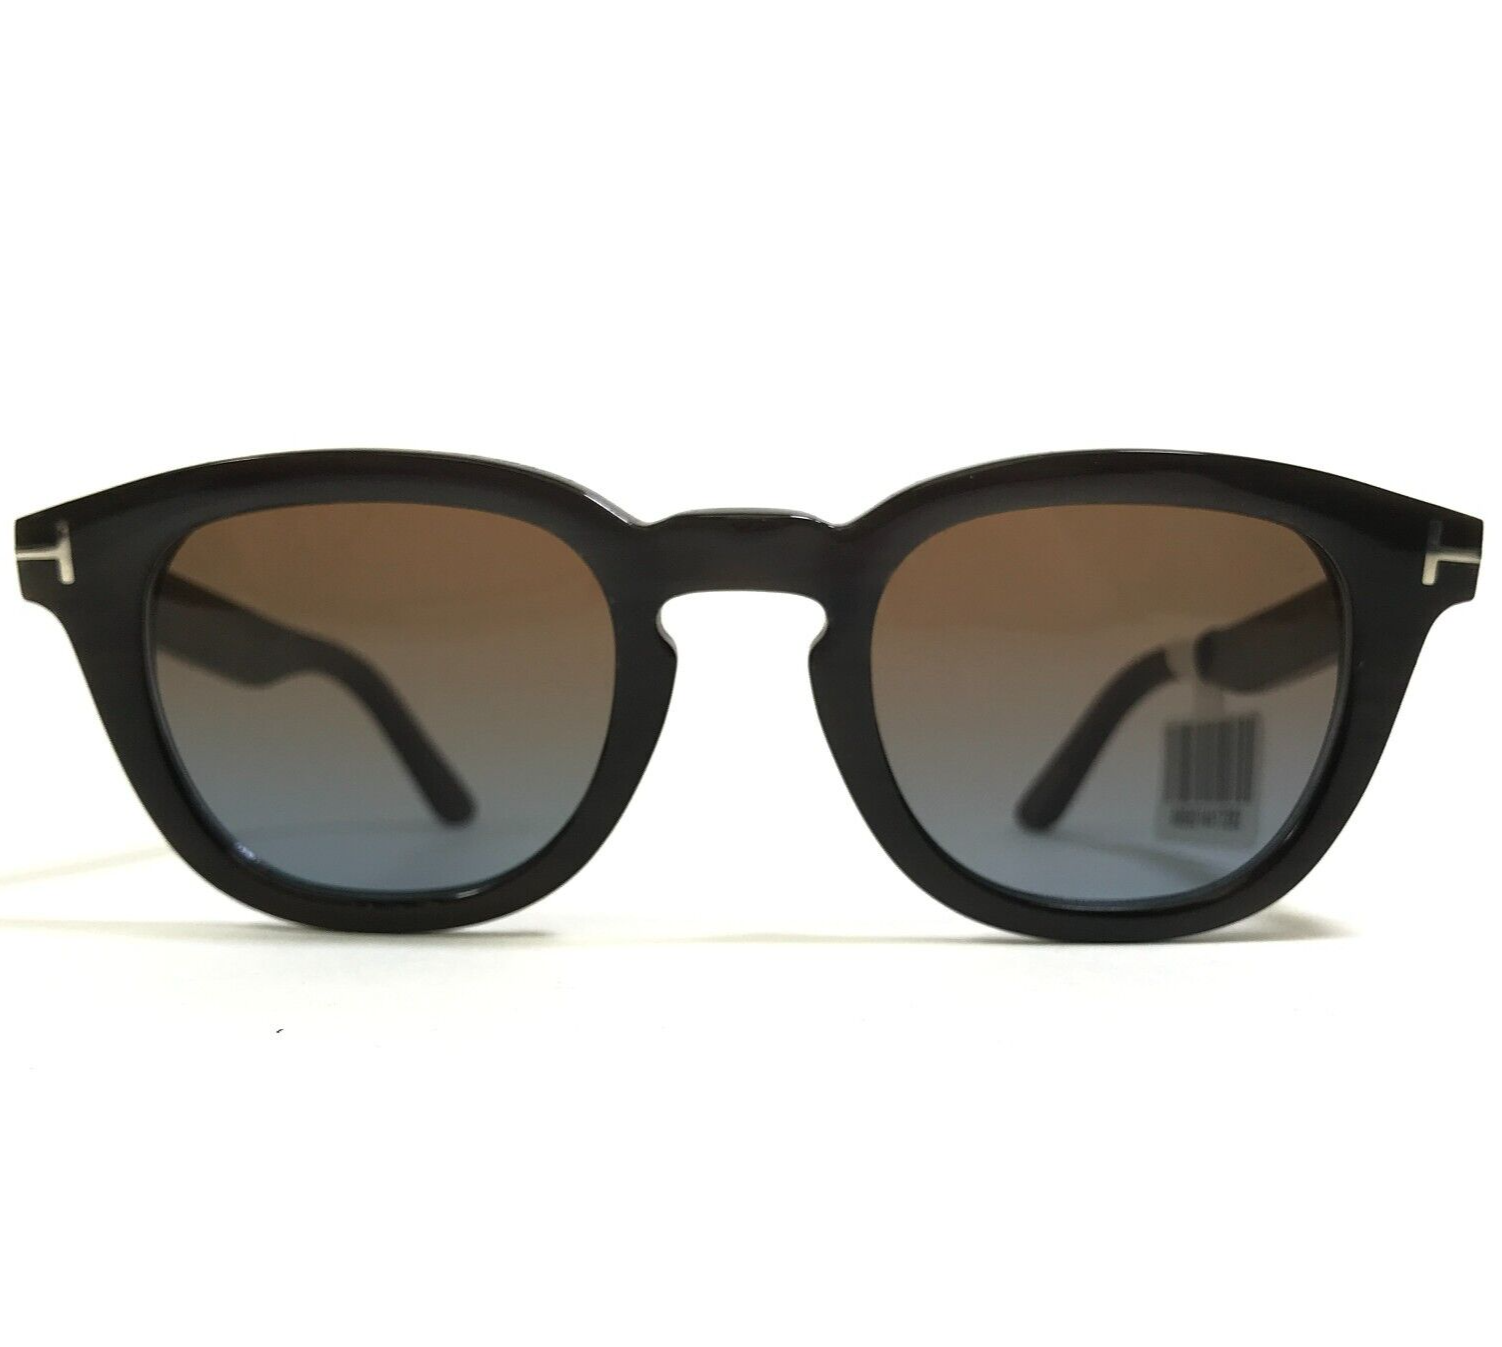 Primary image for Tom Ford Sonnenbrille TF1045-P 62F Private Sammlung Echt Hupe Brown Dick Felge